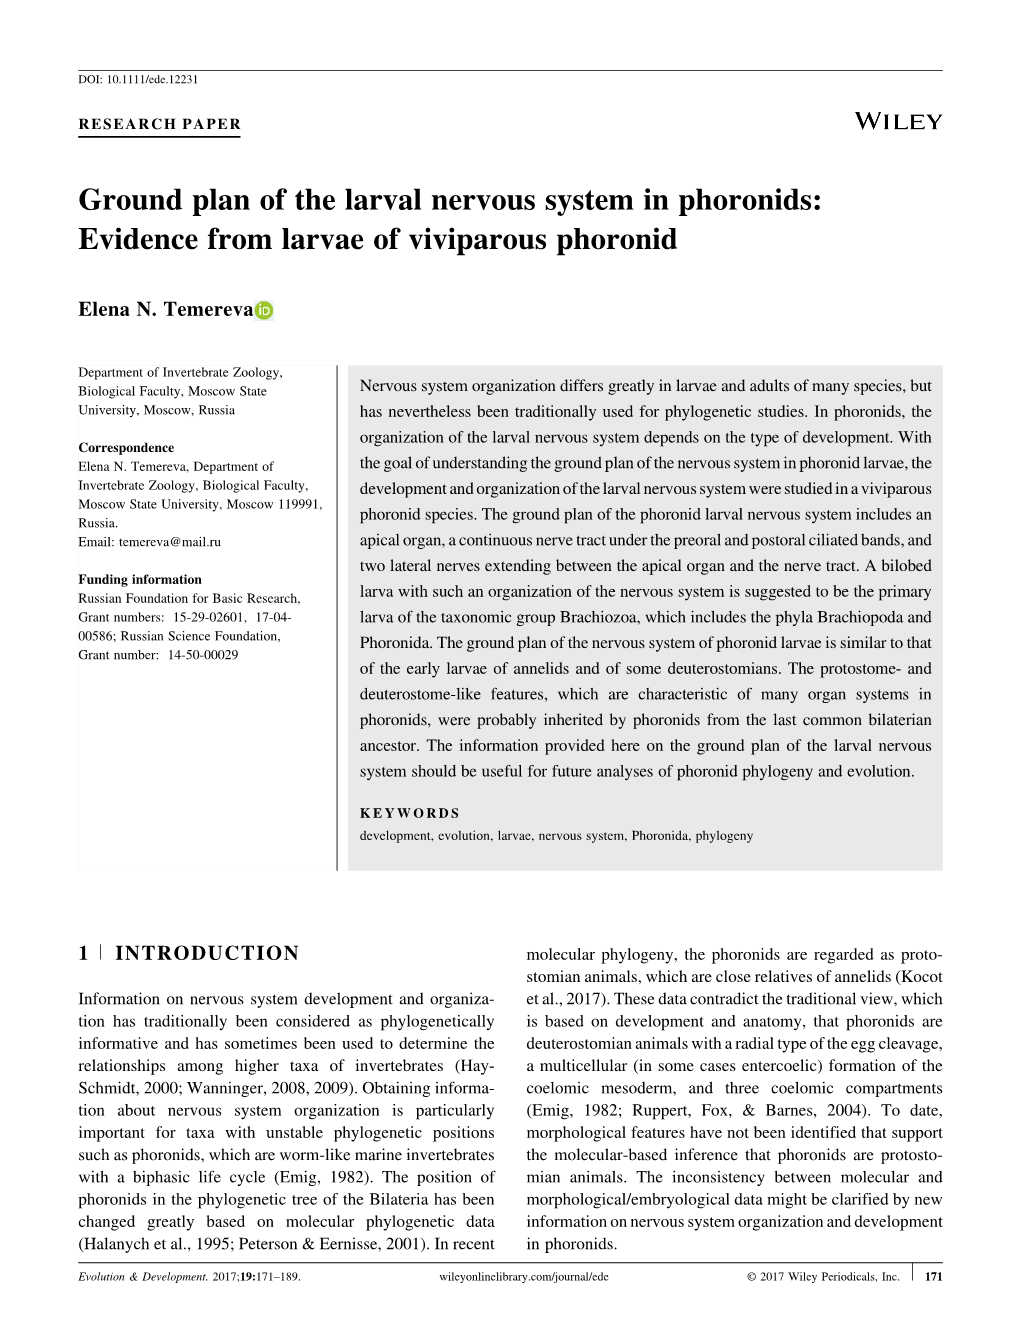 Ground Plan of the Larval Nervous System in Phoronids: Evidence from Larvae of Viviparous Phoronid